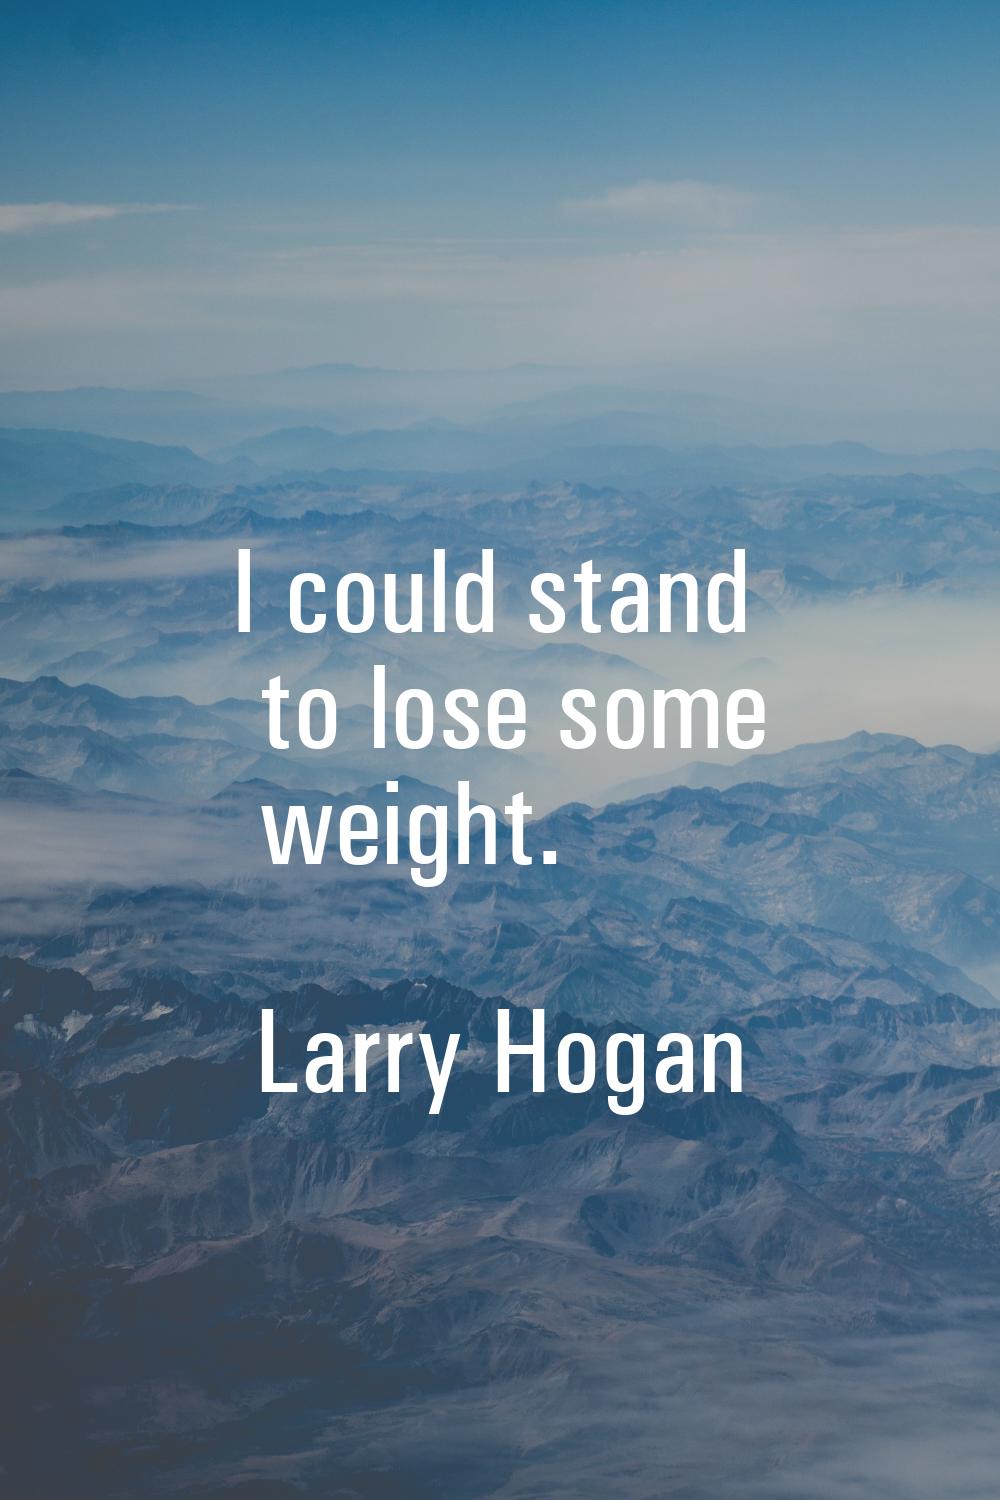 I could stand to lose some weight.